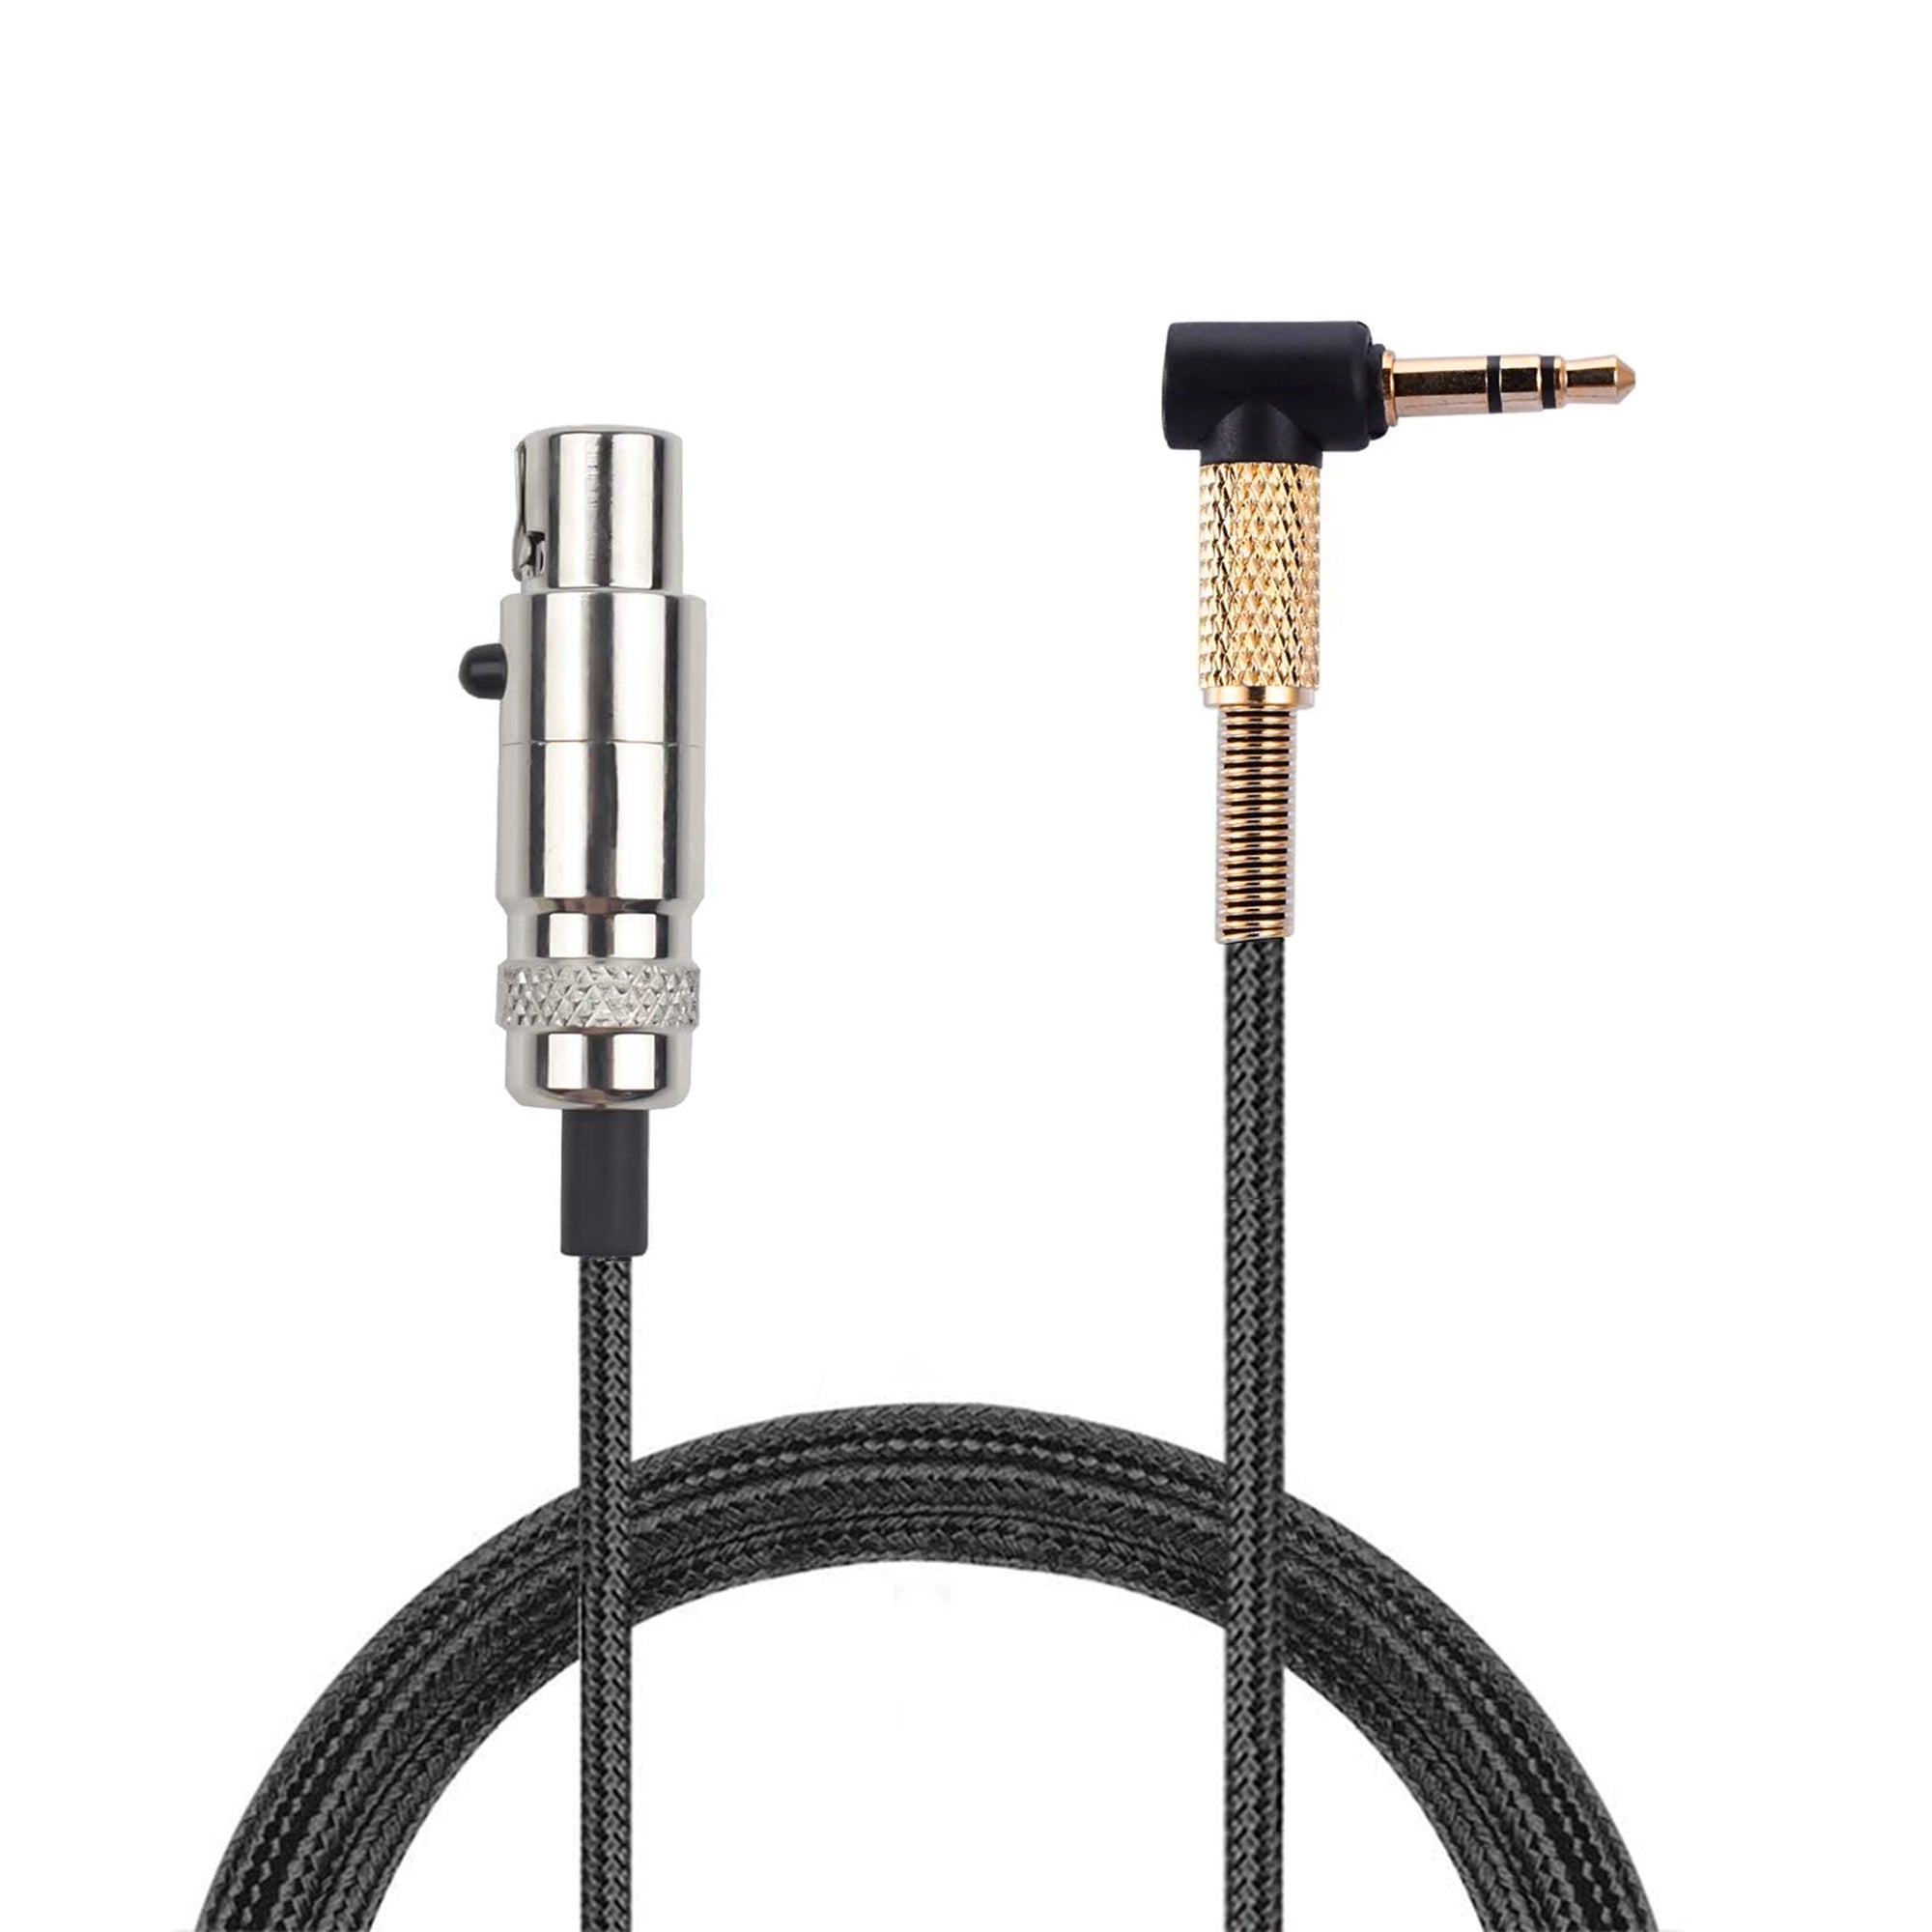 Replacement Braided Cable for AKG K702, K271s, K240s, K712 & Q701, With 3.5mm To Mini-XLR Audio Connector - 1.2M / 47”